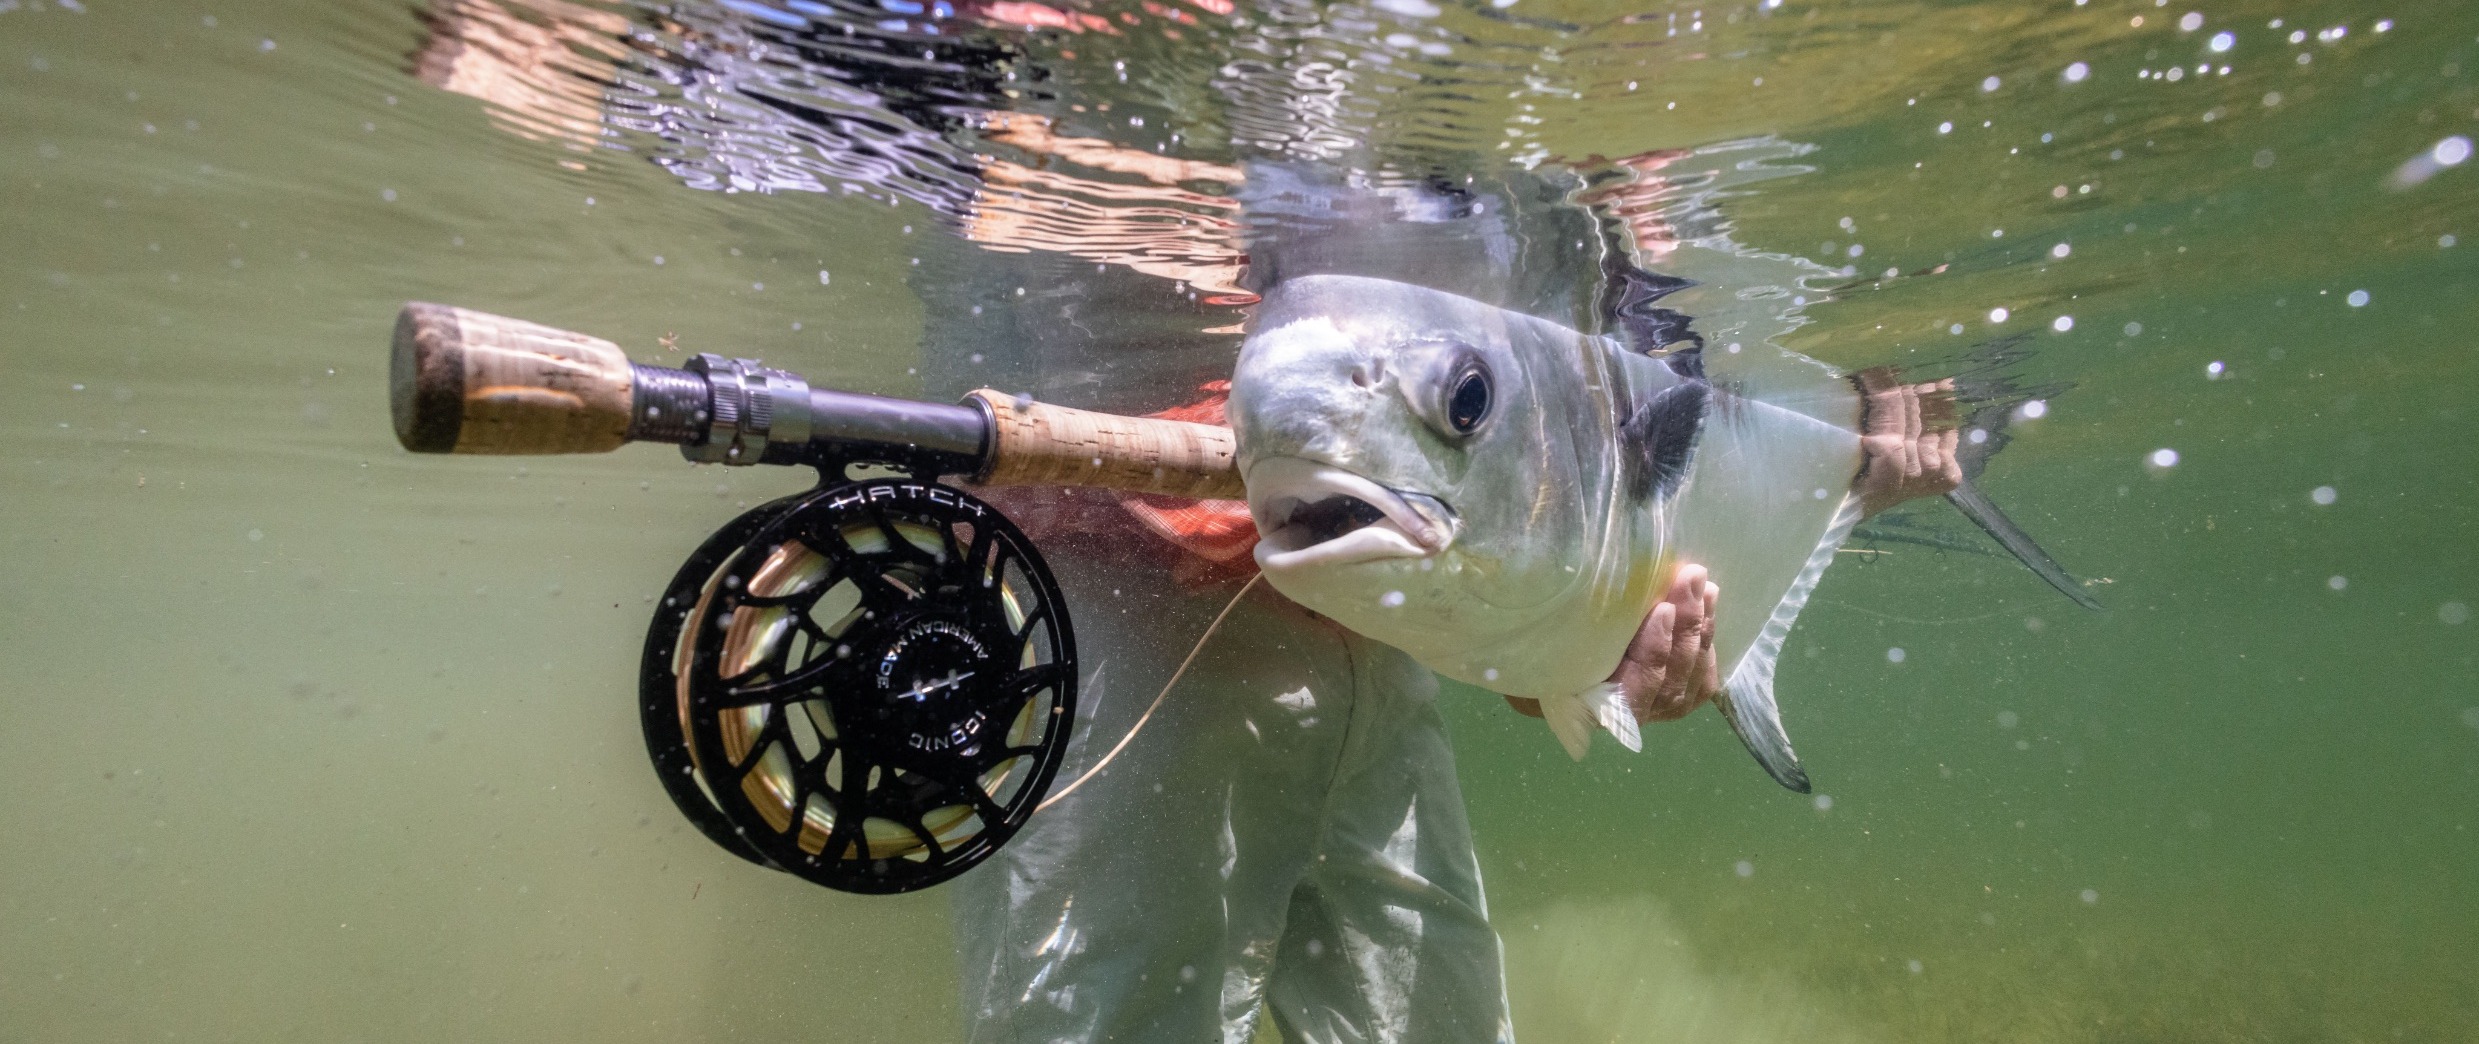 Best Fly Fishing Reel for Salmon - Guide Recommended